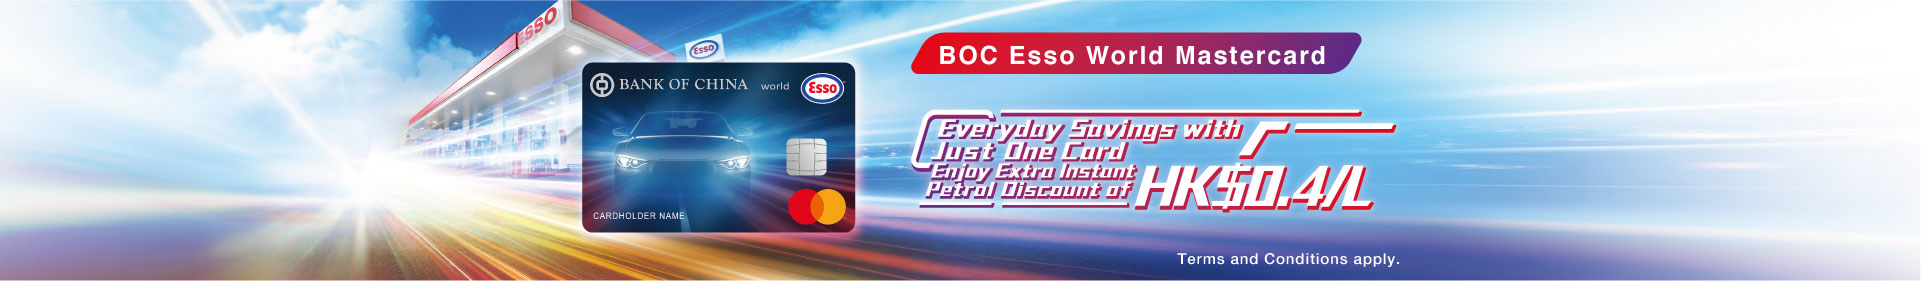 BOCxEsso_Card_webbanner_1920x280_20MAY20_aw5